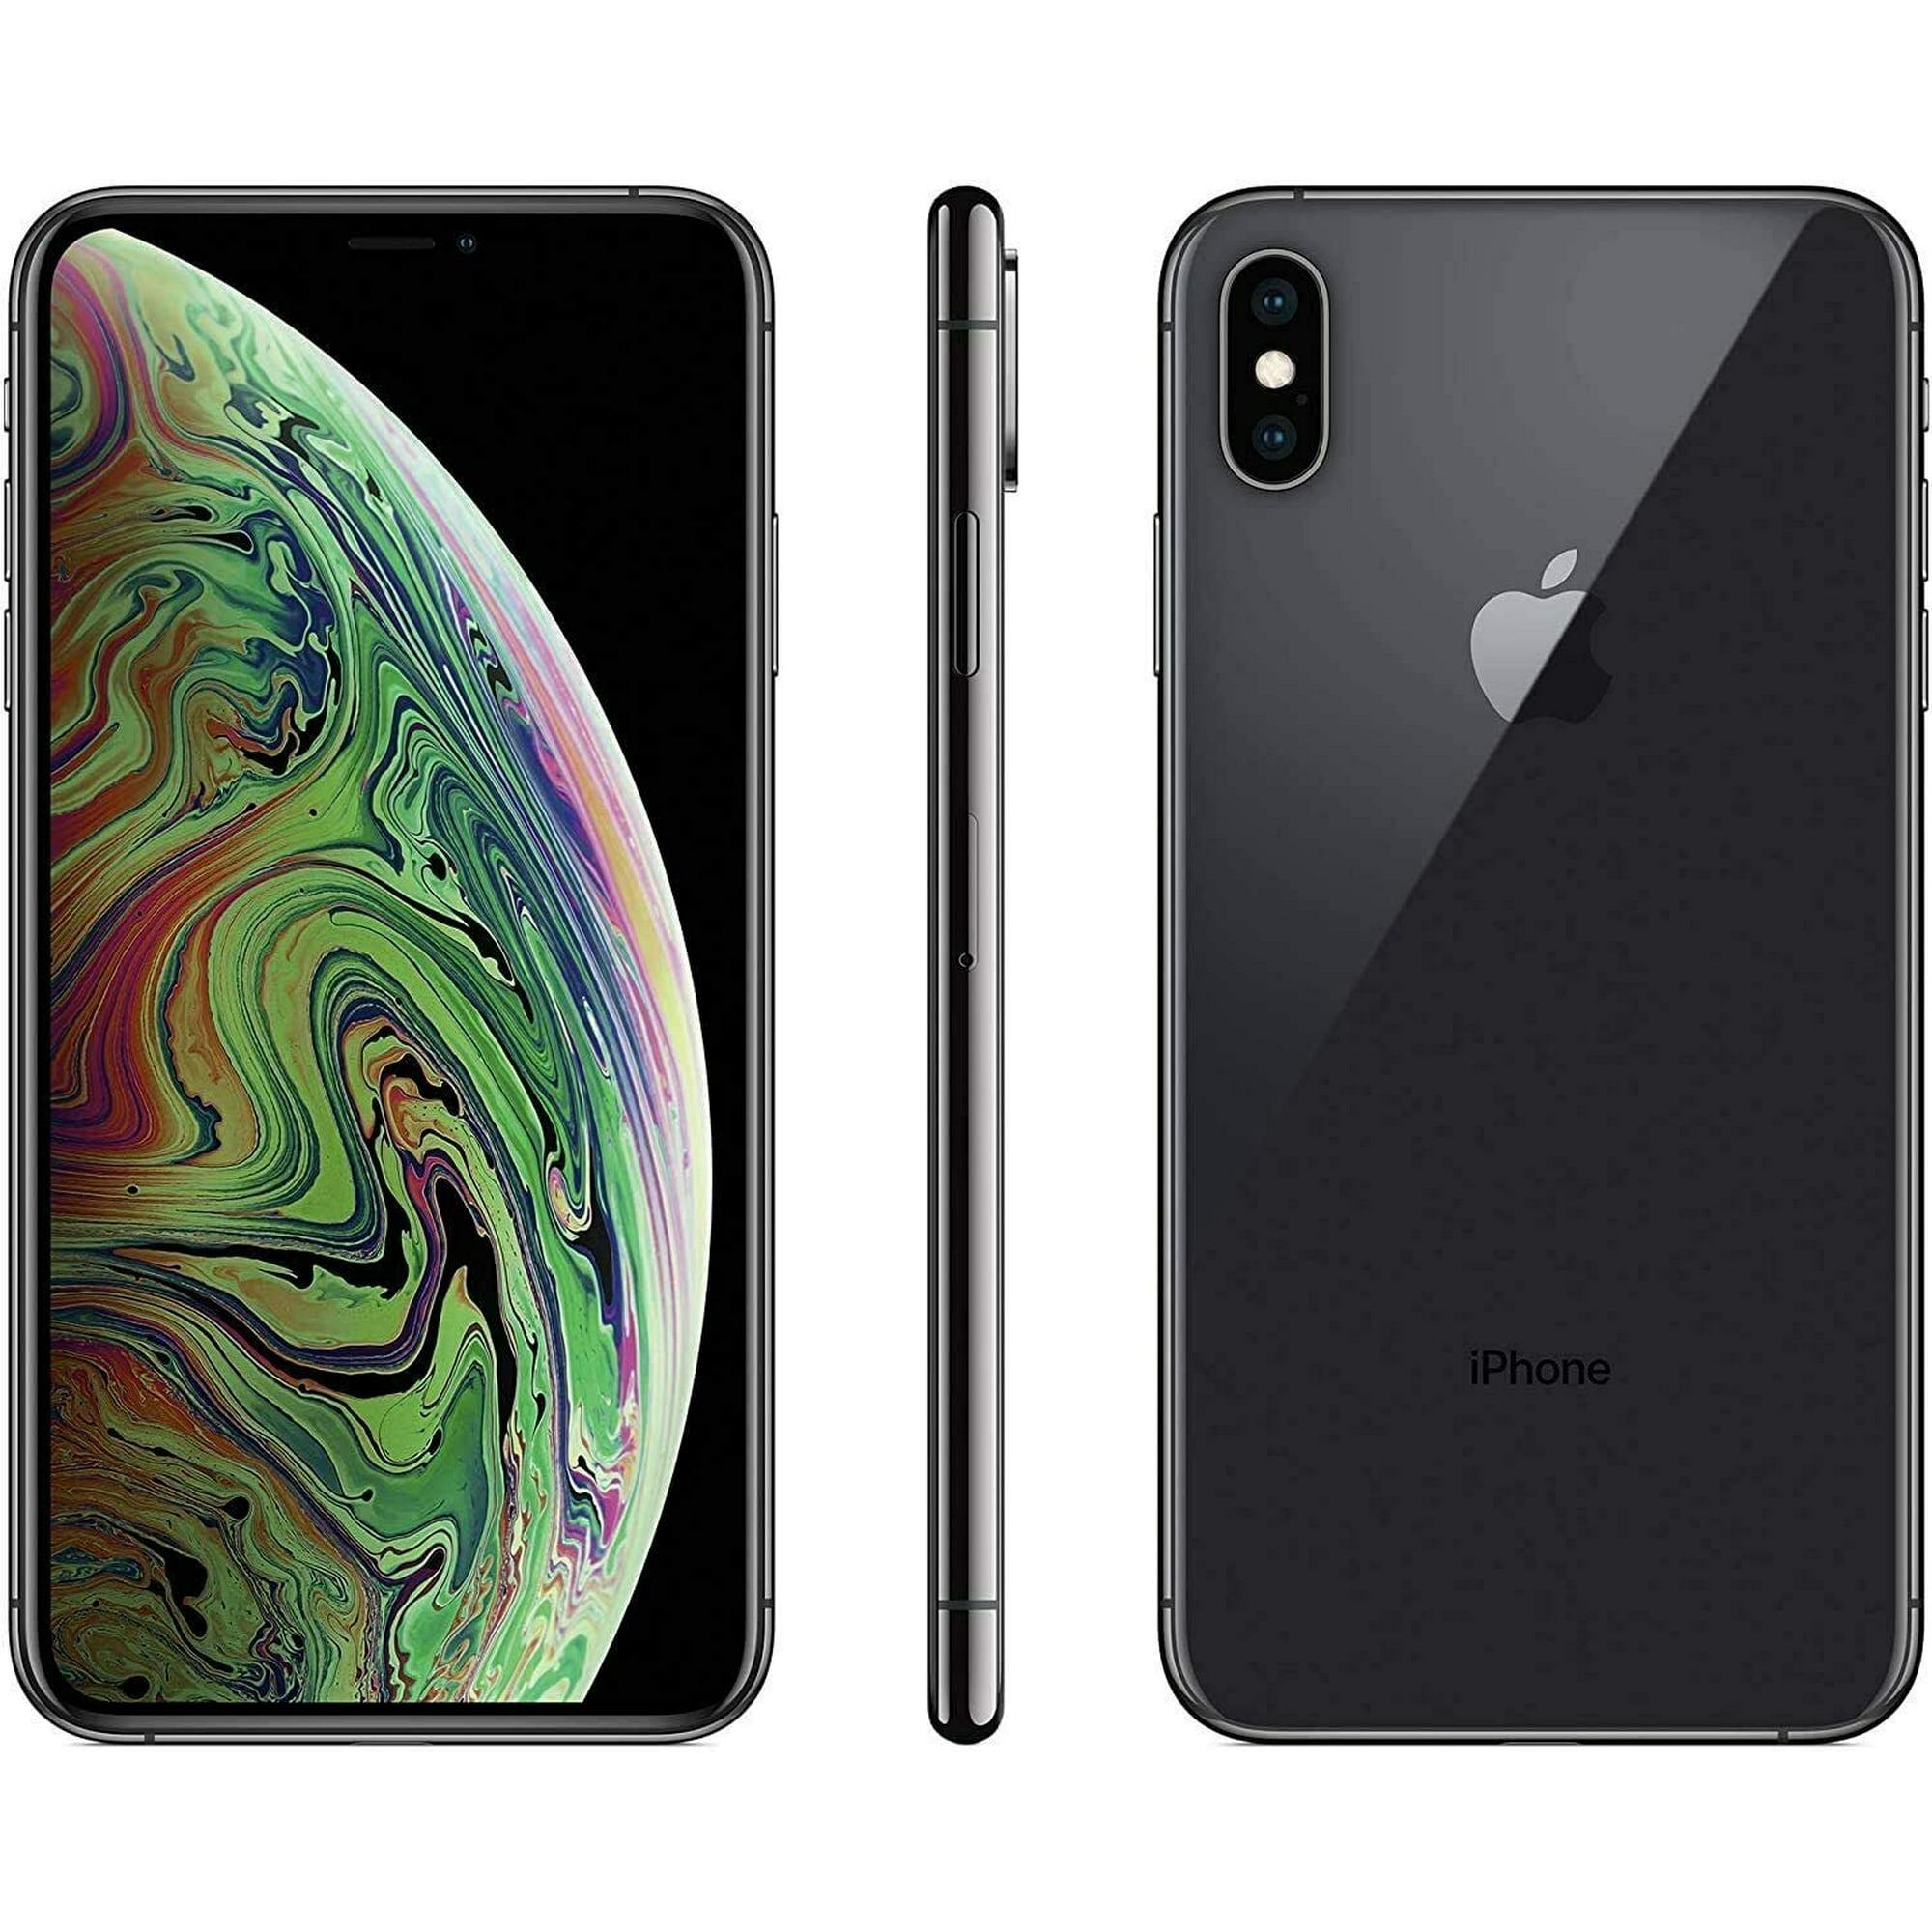 Pre-Owned Apple iPhone XS Max, 64GB, Space Gray - Fully Unlocked  (Refurbished: Good)